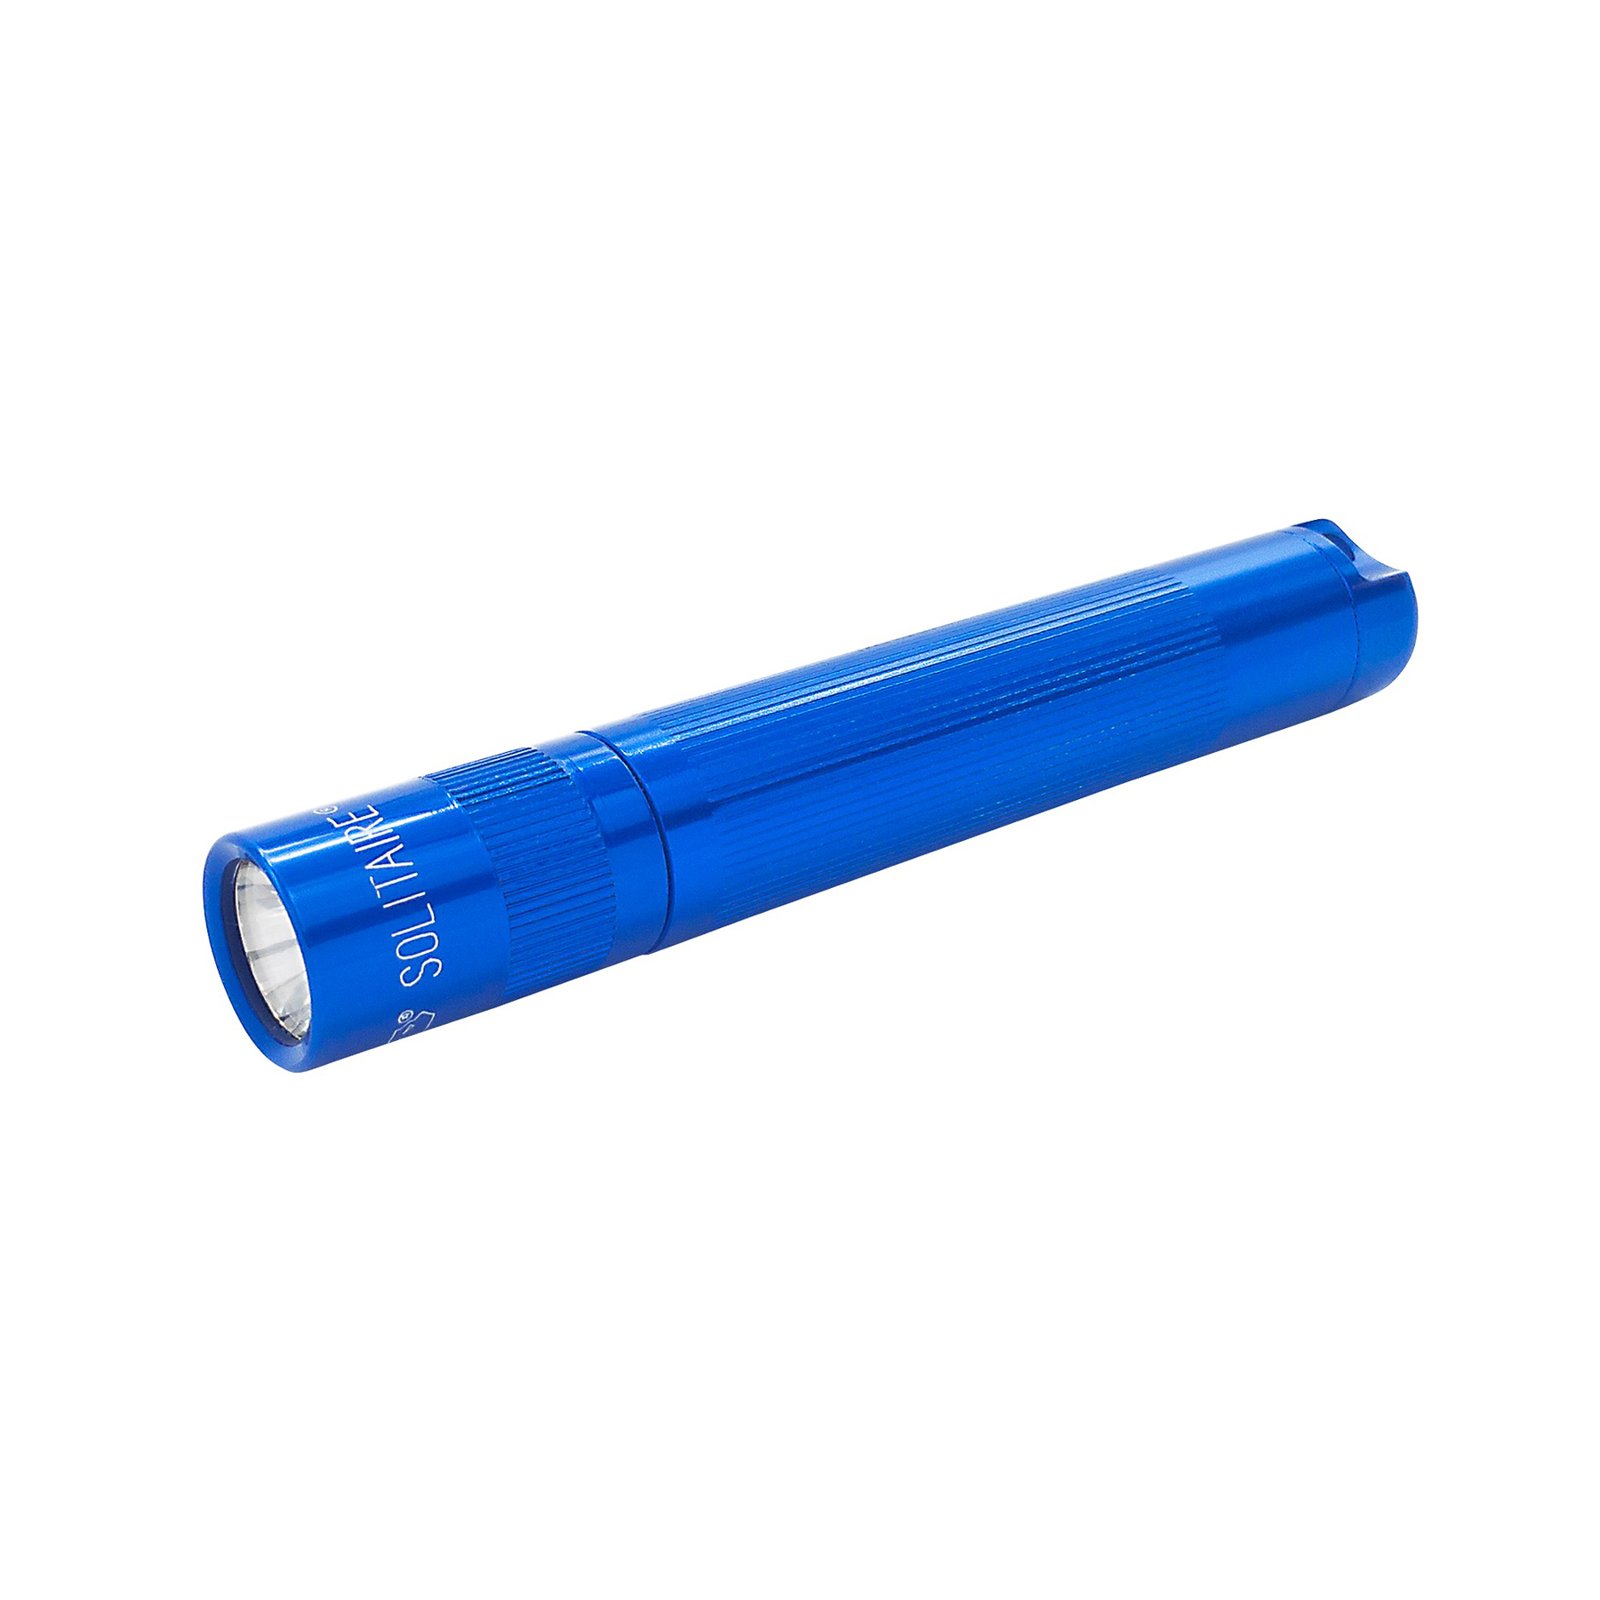 Maglite Solitaire LED torch, 1-Cell AAA, blue